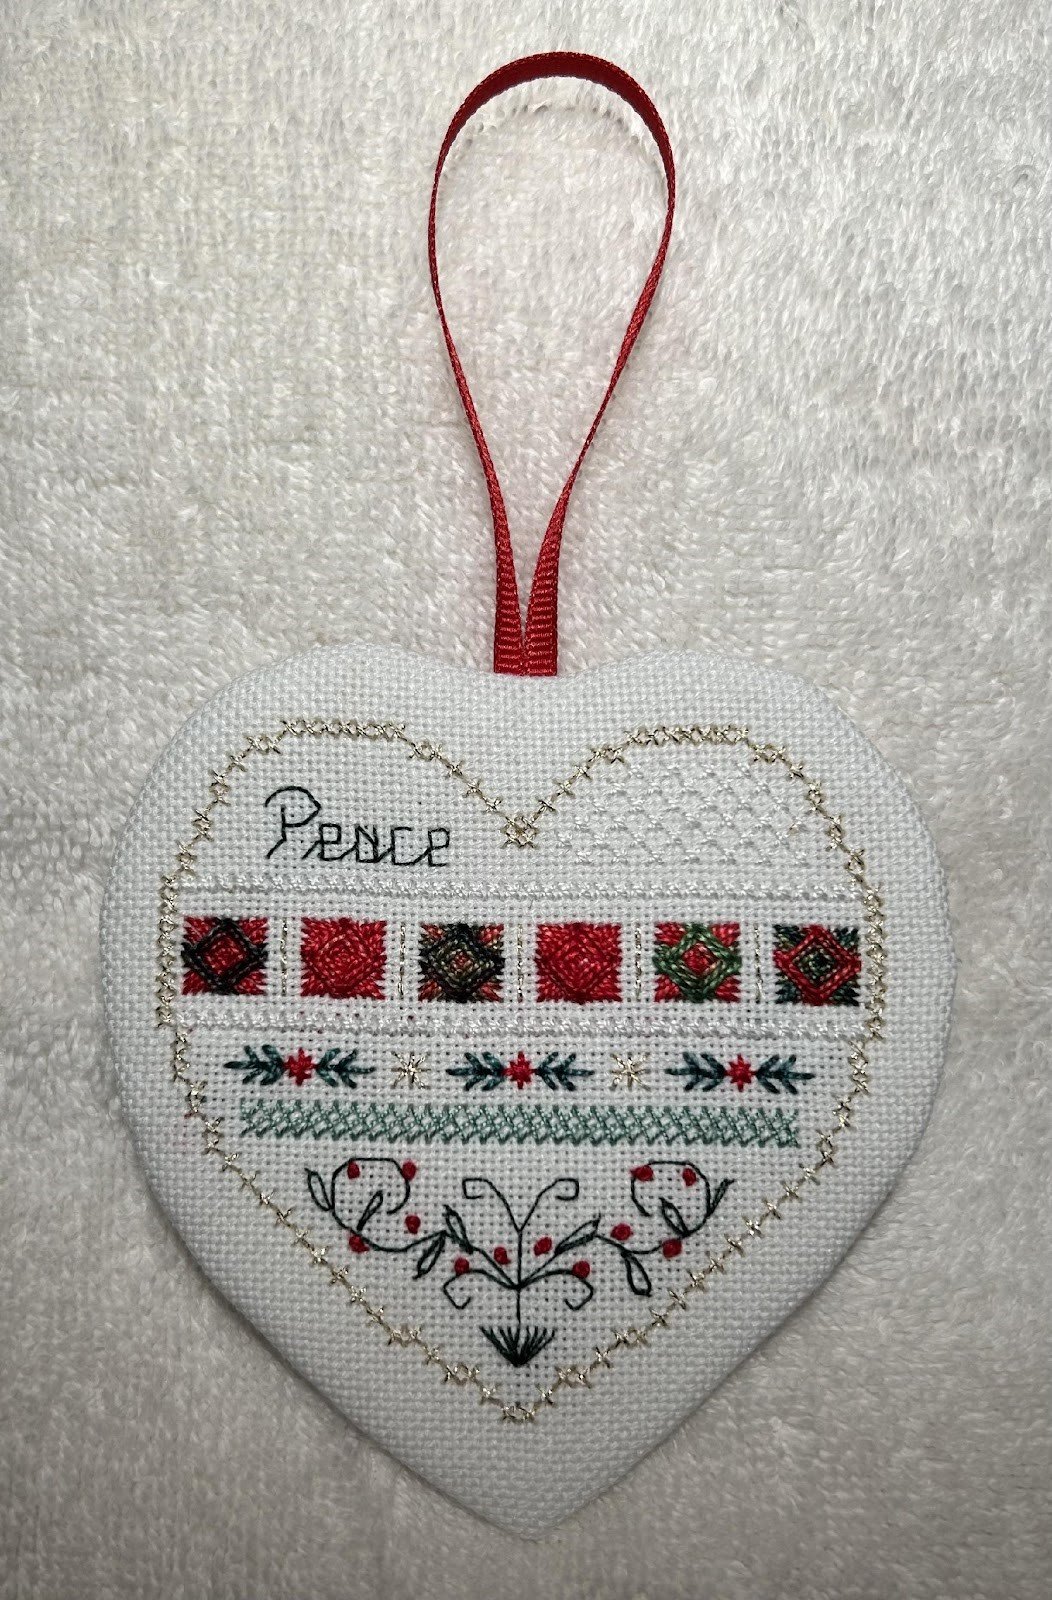 "Peace" featuring the Waffle Stitch 